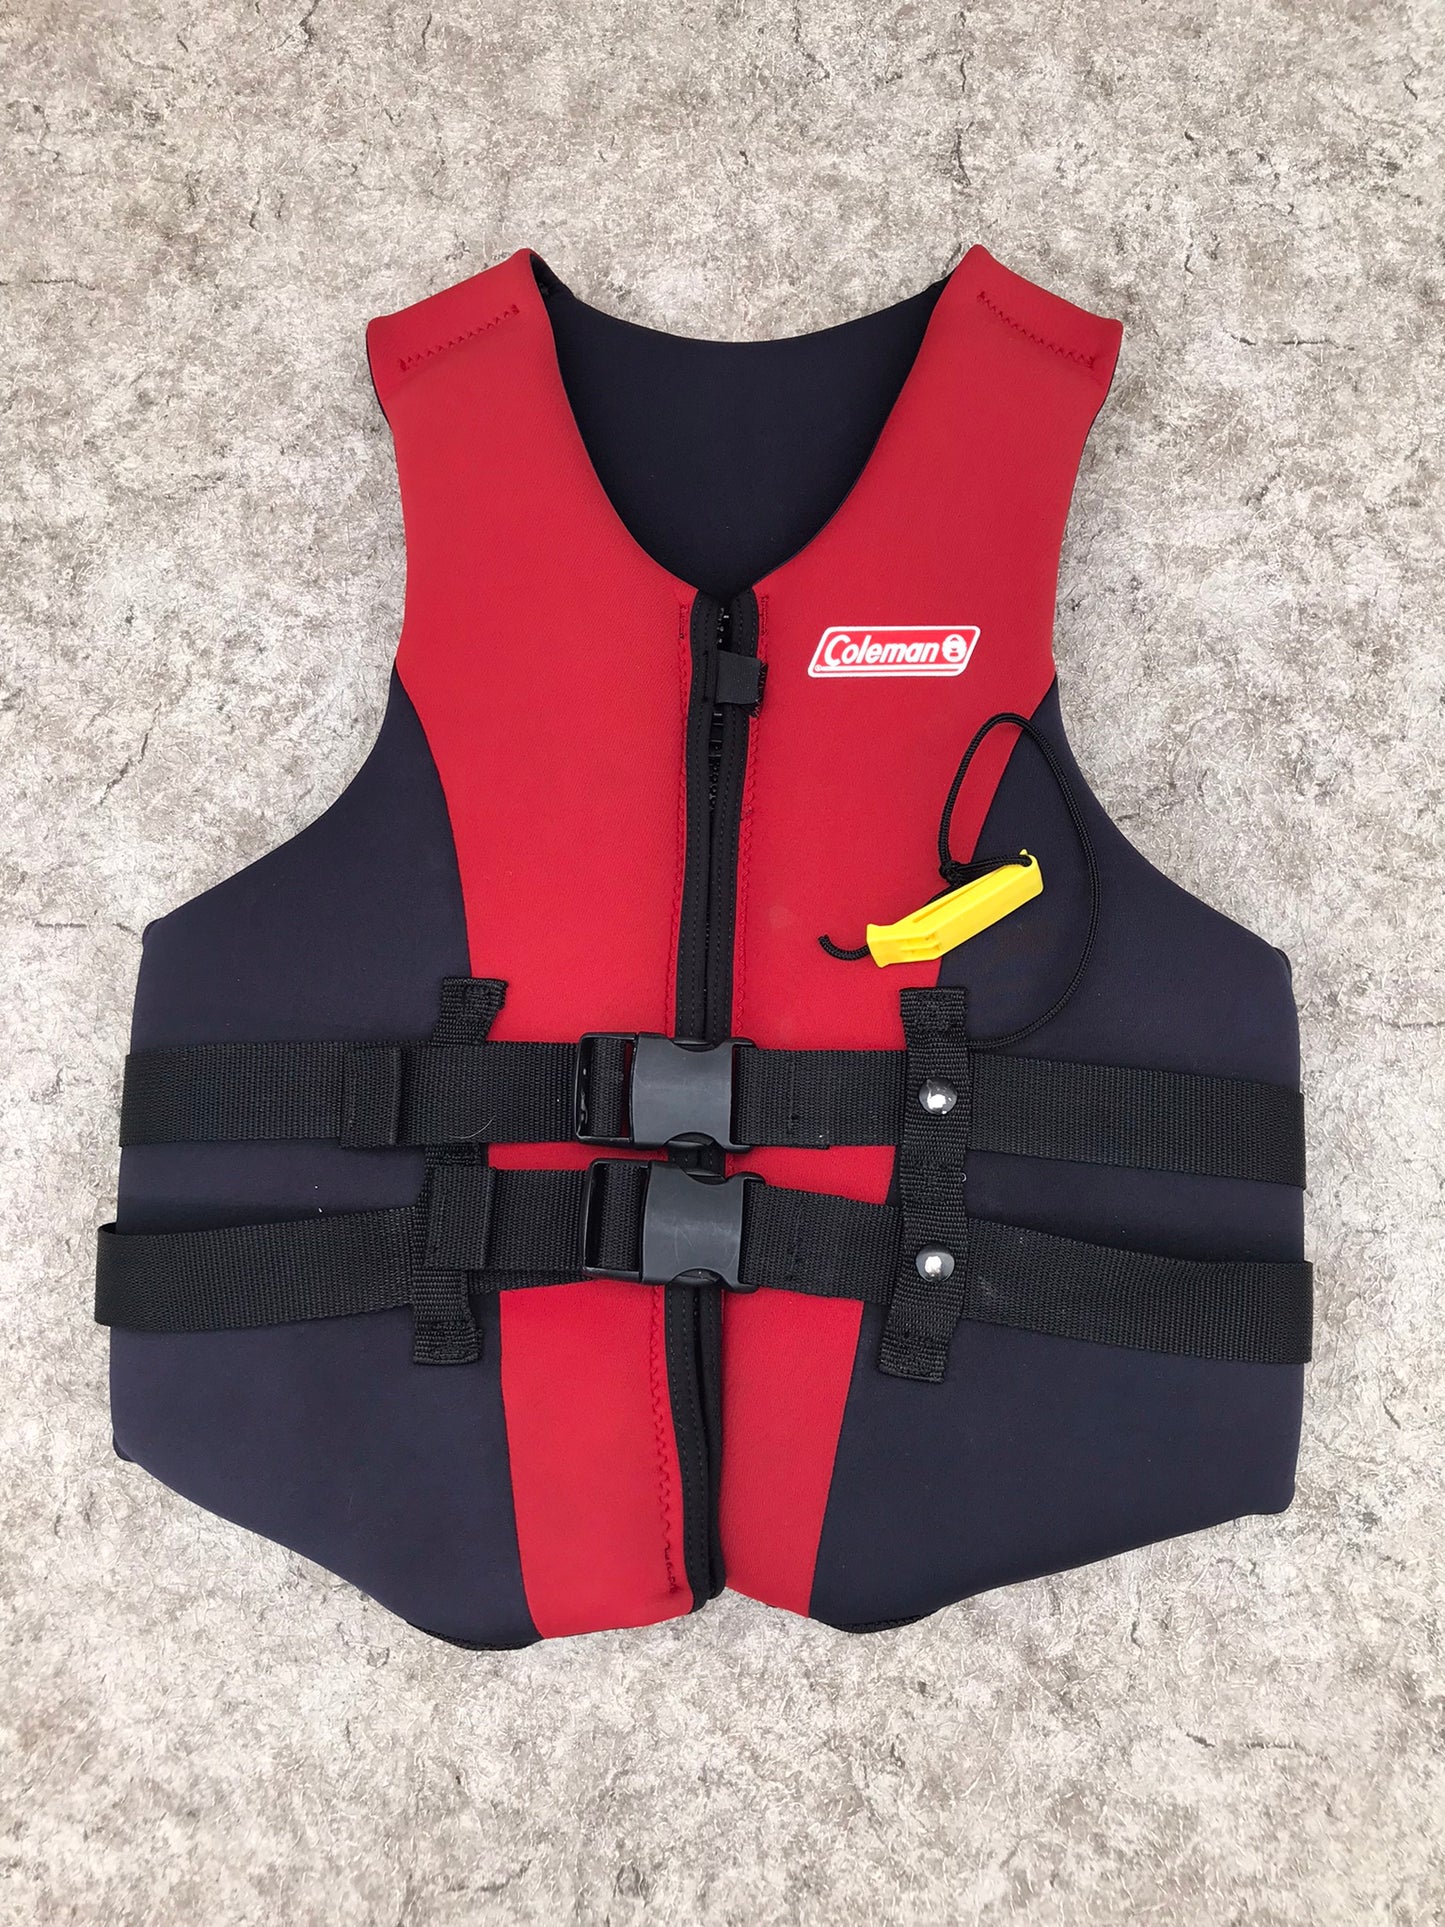 Life Jacket Adult Size Medium Coleman Neoprene Red Black With Whistle  Excellent